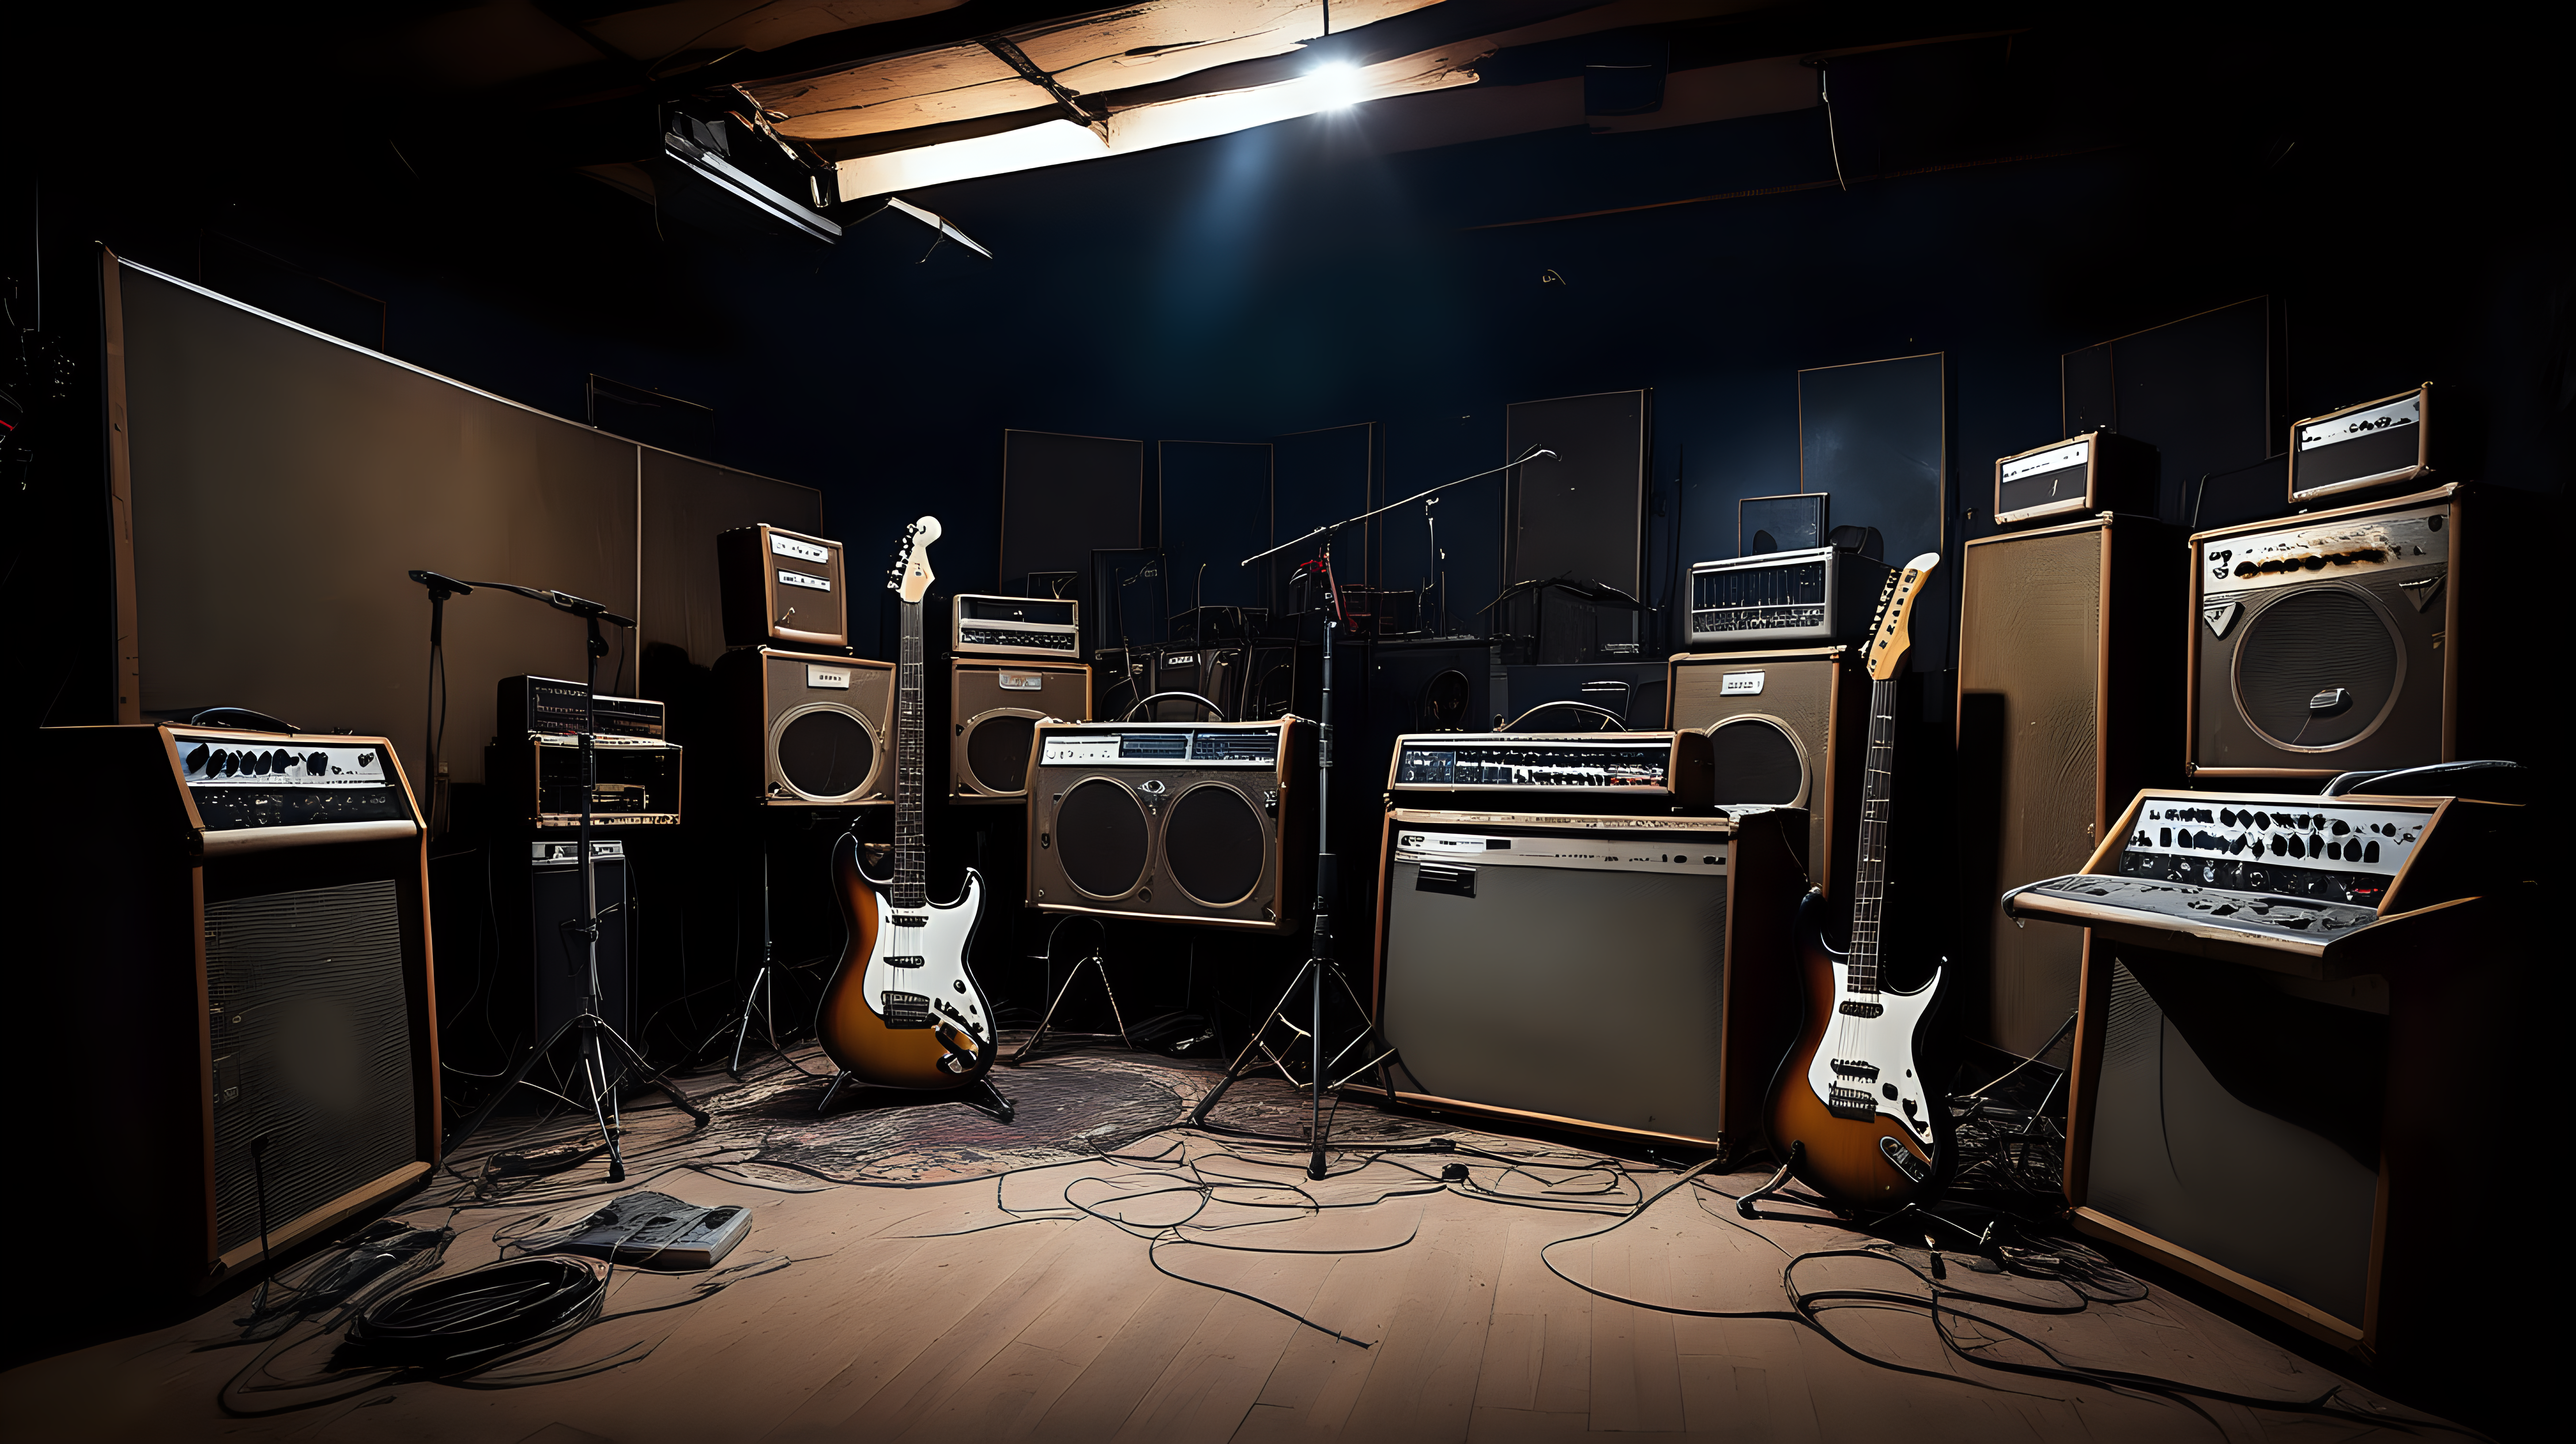 Old worn out music studio with vintage amplifiers